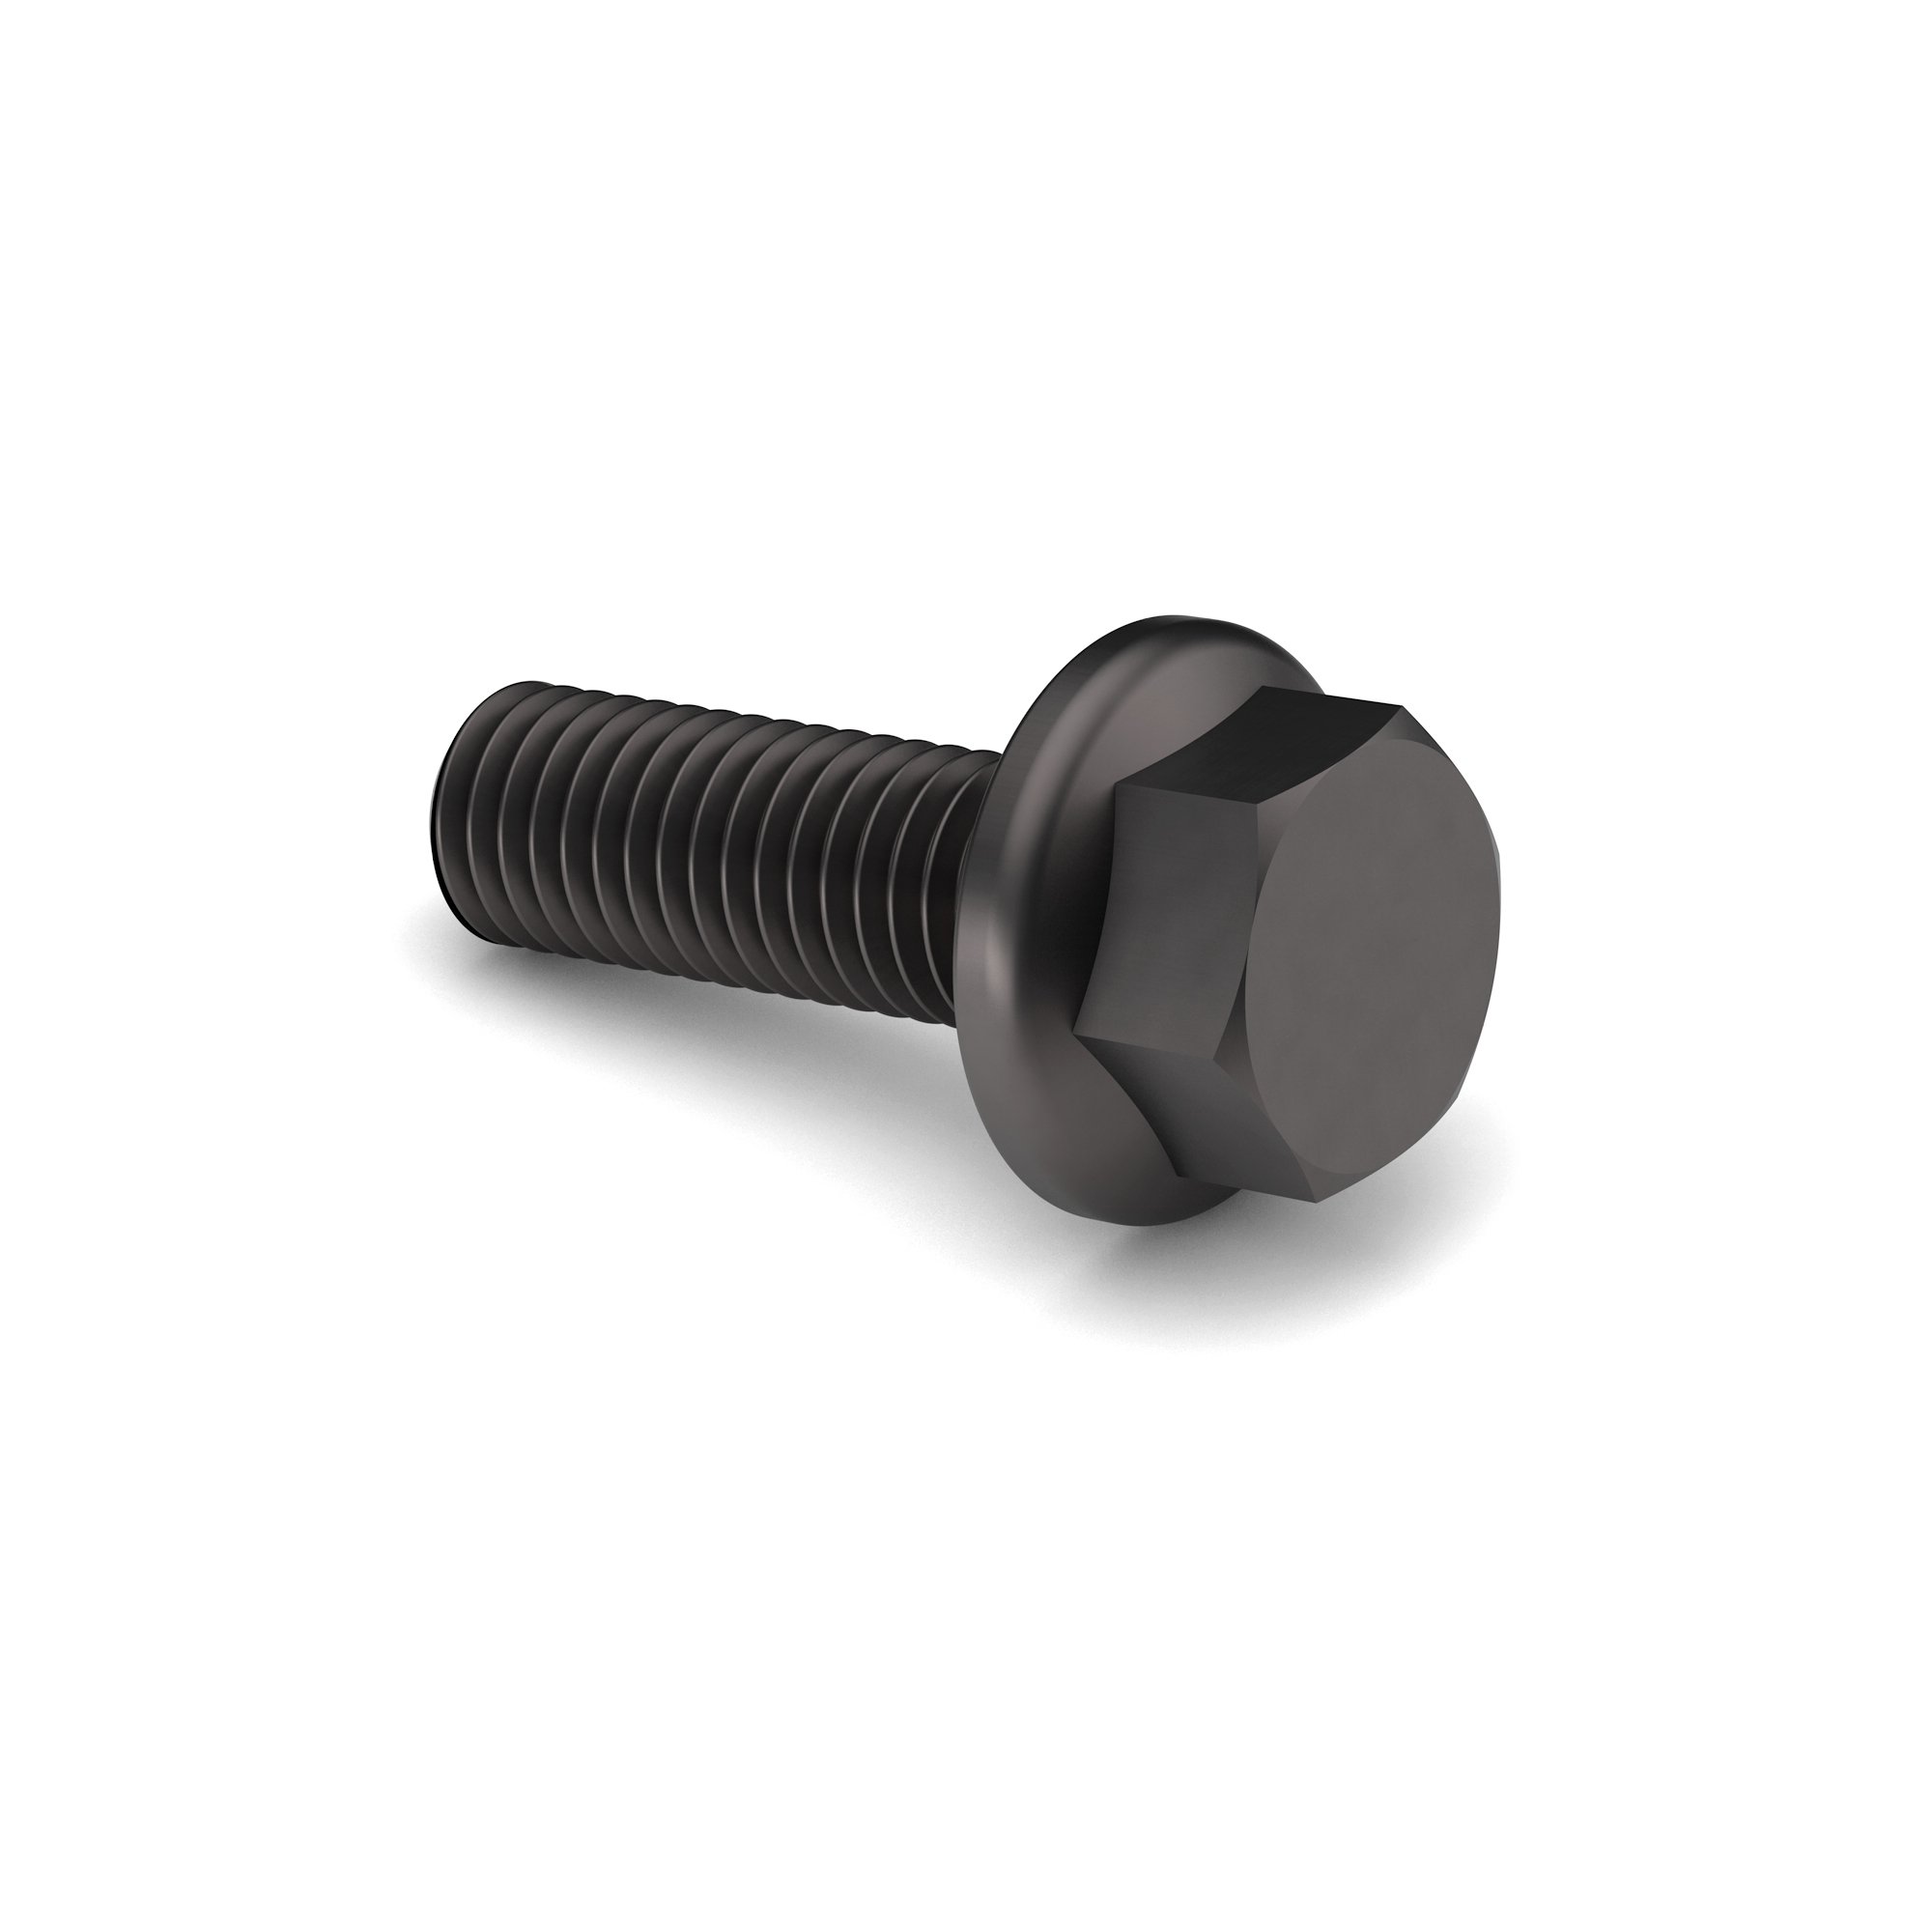 M5-0.8x8 ISO 10.9 Hex Flange Bolt DIN 6921 Full Thrd Magni 565 Black 1000 Hours to Red per AES00036